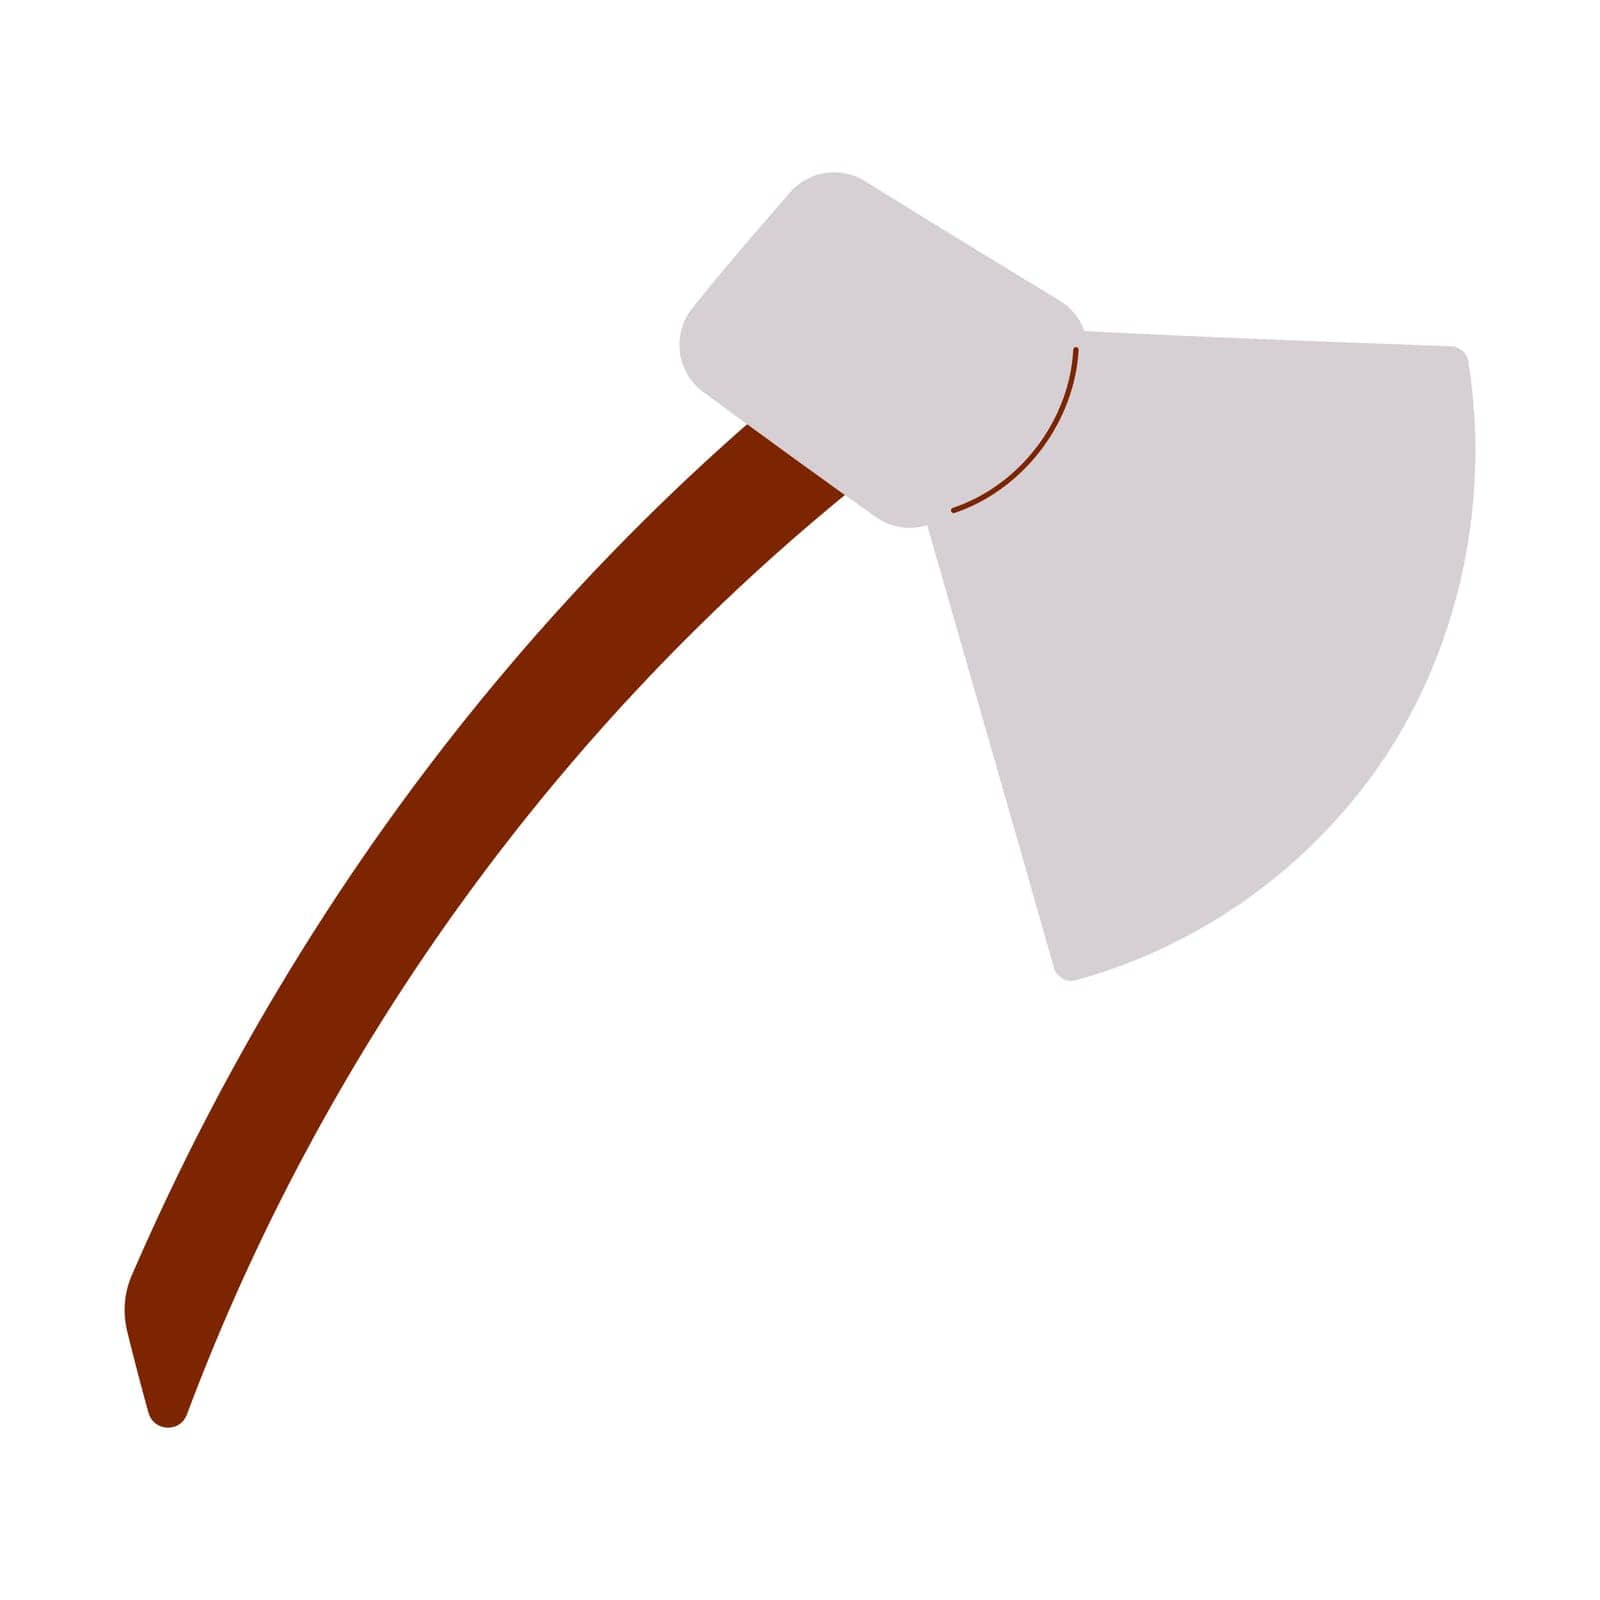 An ax is a metal tool with a wooden handle for use in the garden, at home, and outdoors. Sharp weapon. Chop wood and use it in construction. Hand drawn vector illustration. Icon, element, object.